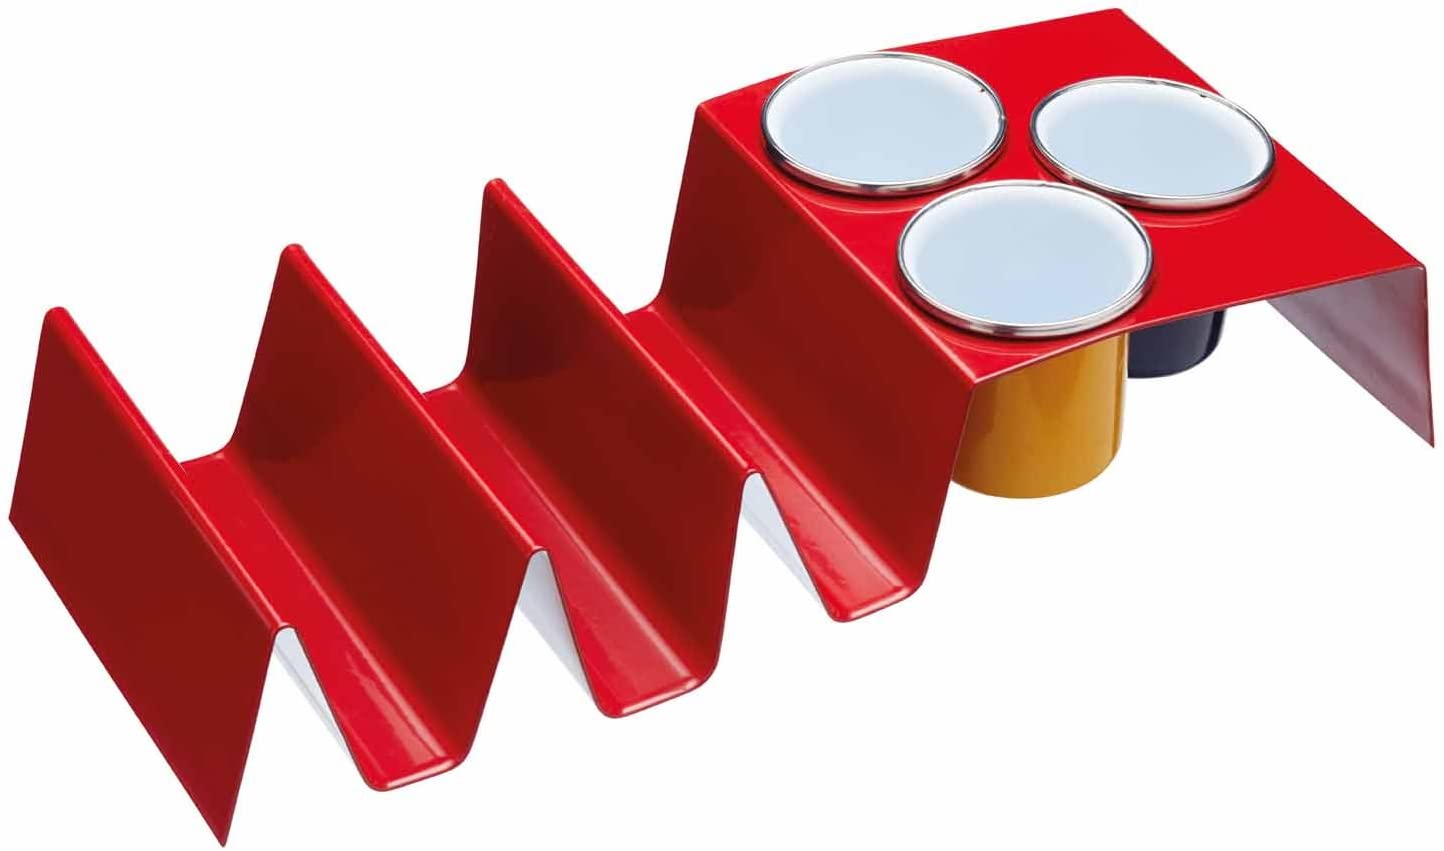 KitchenCraft Kitchen Craft World of Flavours Metal Taco Holder and Dip Bowl Set – Multicolour (Pack of 4), Red